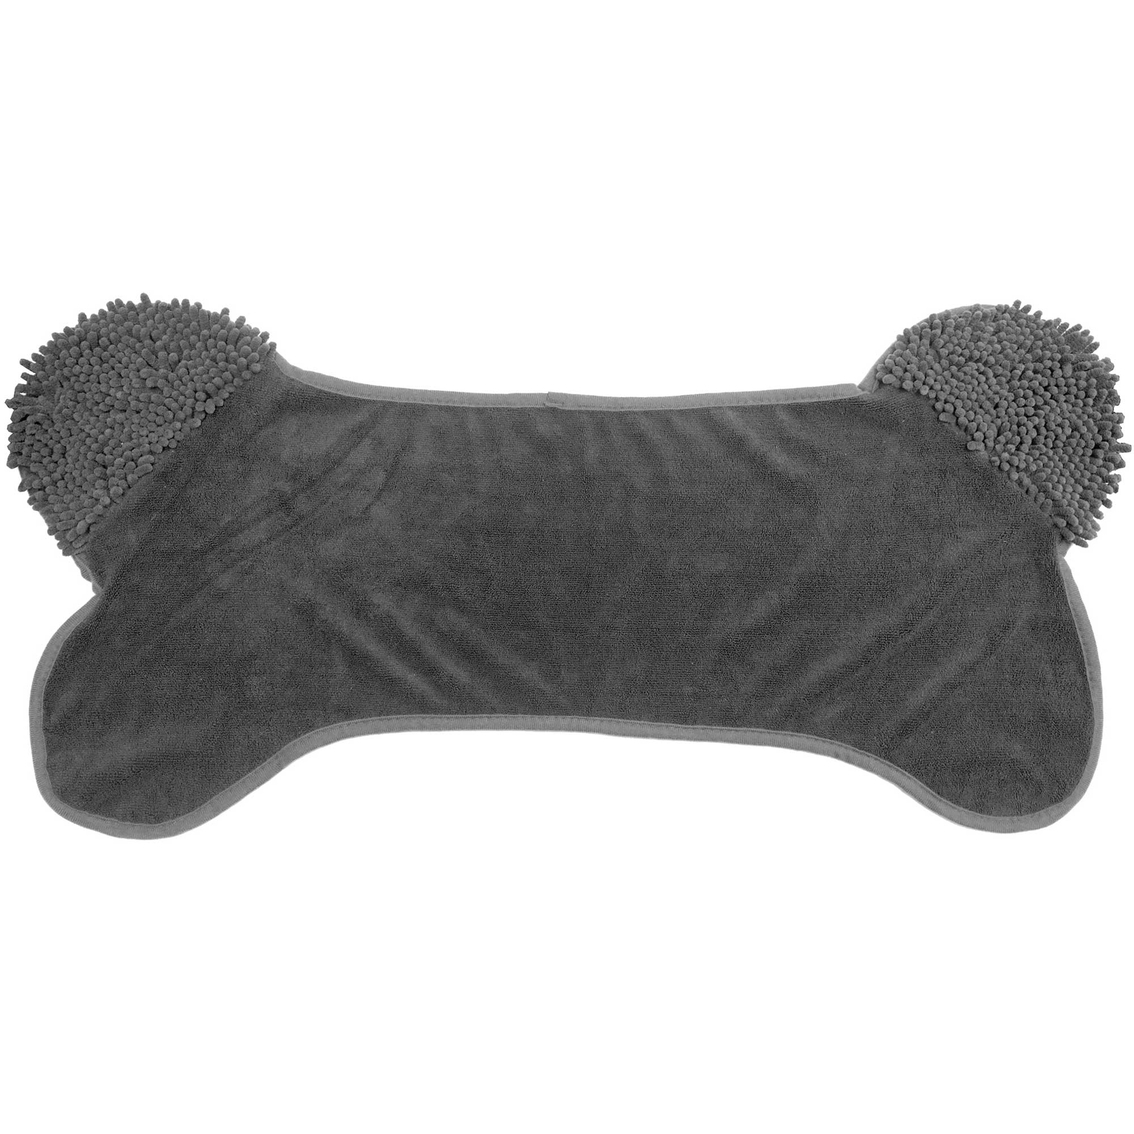 Spot Clean Paws Towel 30 x 16 in. - Image 4 of 4